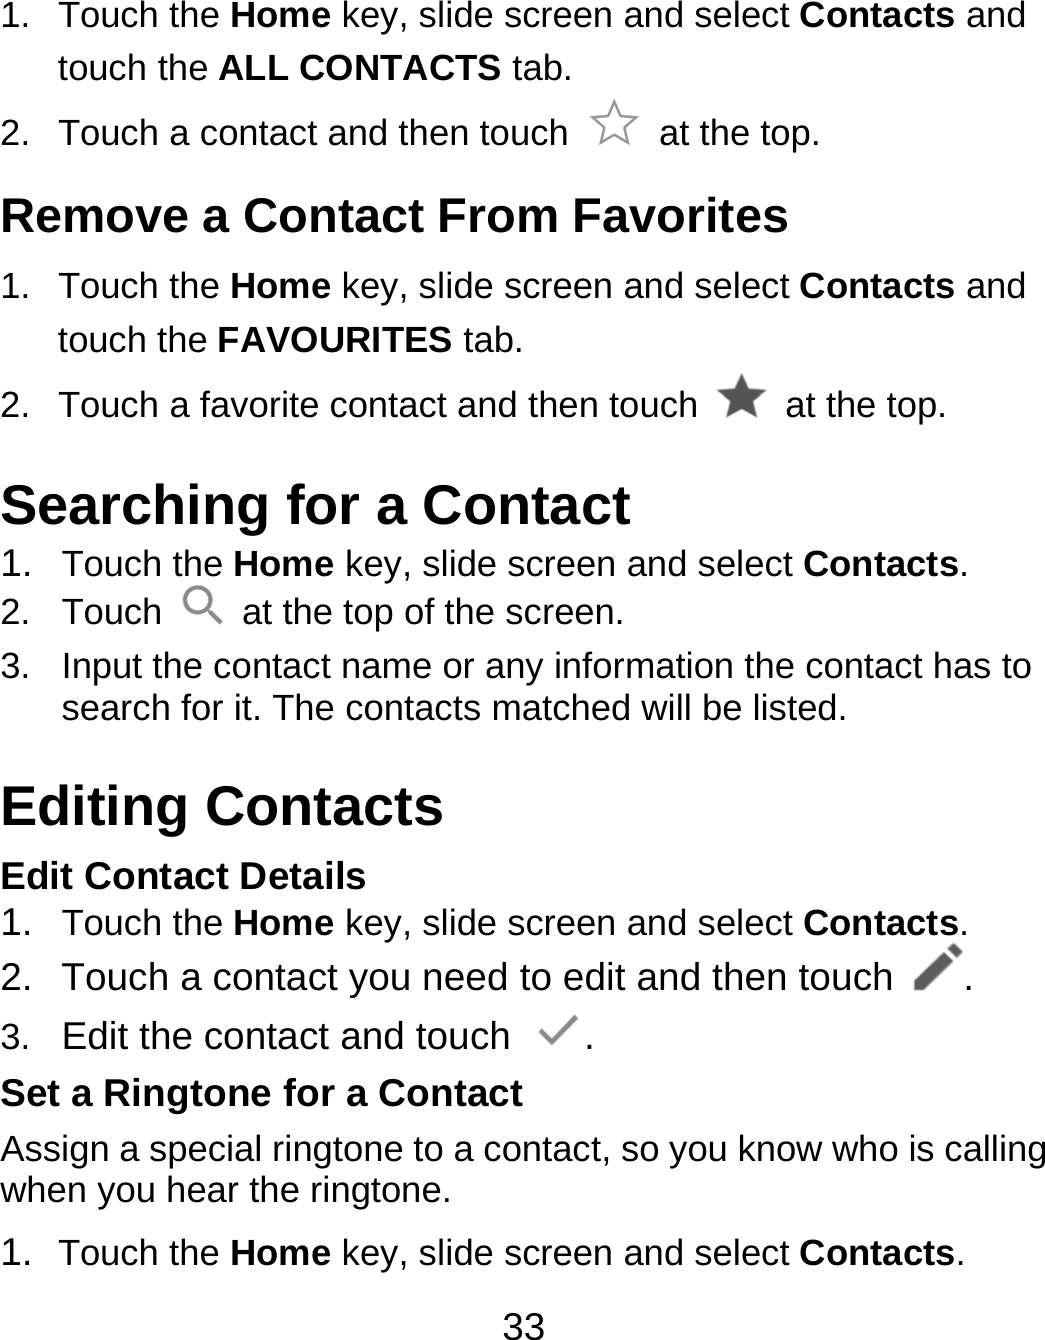 33 1. Touch the Home key, slide screen and select Contacts and touch the ALL CONTACTS tab. 2.  Touch a contact and then touch   at the top. Remove a Contact From Favorites 1. Touch the Home key, slide screen and select Contacts and touch the FAVOURITES tab. 2.  Touch a favorite contact and then touch    at the top. Searching for a Contact 1.  Touch the Home key, slide screen and select Contacts. 2. Touch    at the top of the screen. 3.  Input the contact name or any information the contact has to search for it. The contacts matched will be listed. Editing Contacts Edit Contact Details 1.  Touch the Home key, slide screen and select Contacts. 2.  Touch a contact you need to edit and then touch  . 3.  Edit the contact and touch  . Set a Ringtone for a Contact Assign a special ringtone to a contact, so you know who is calling when you hear the ringtone. 1.  Touch the Home key, slide screen and select Contacts. 